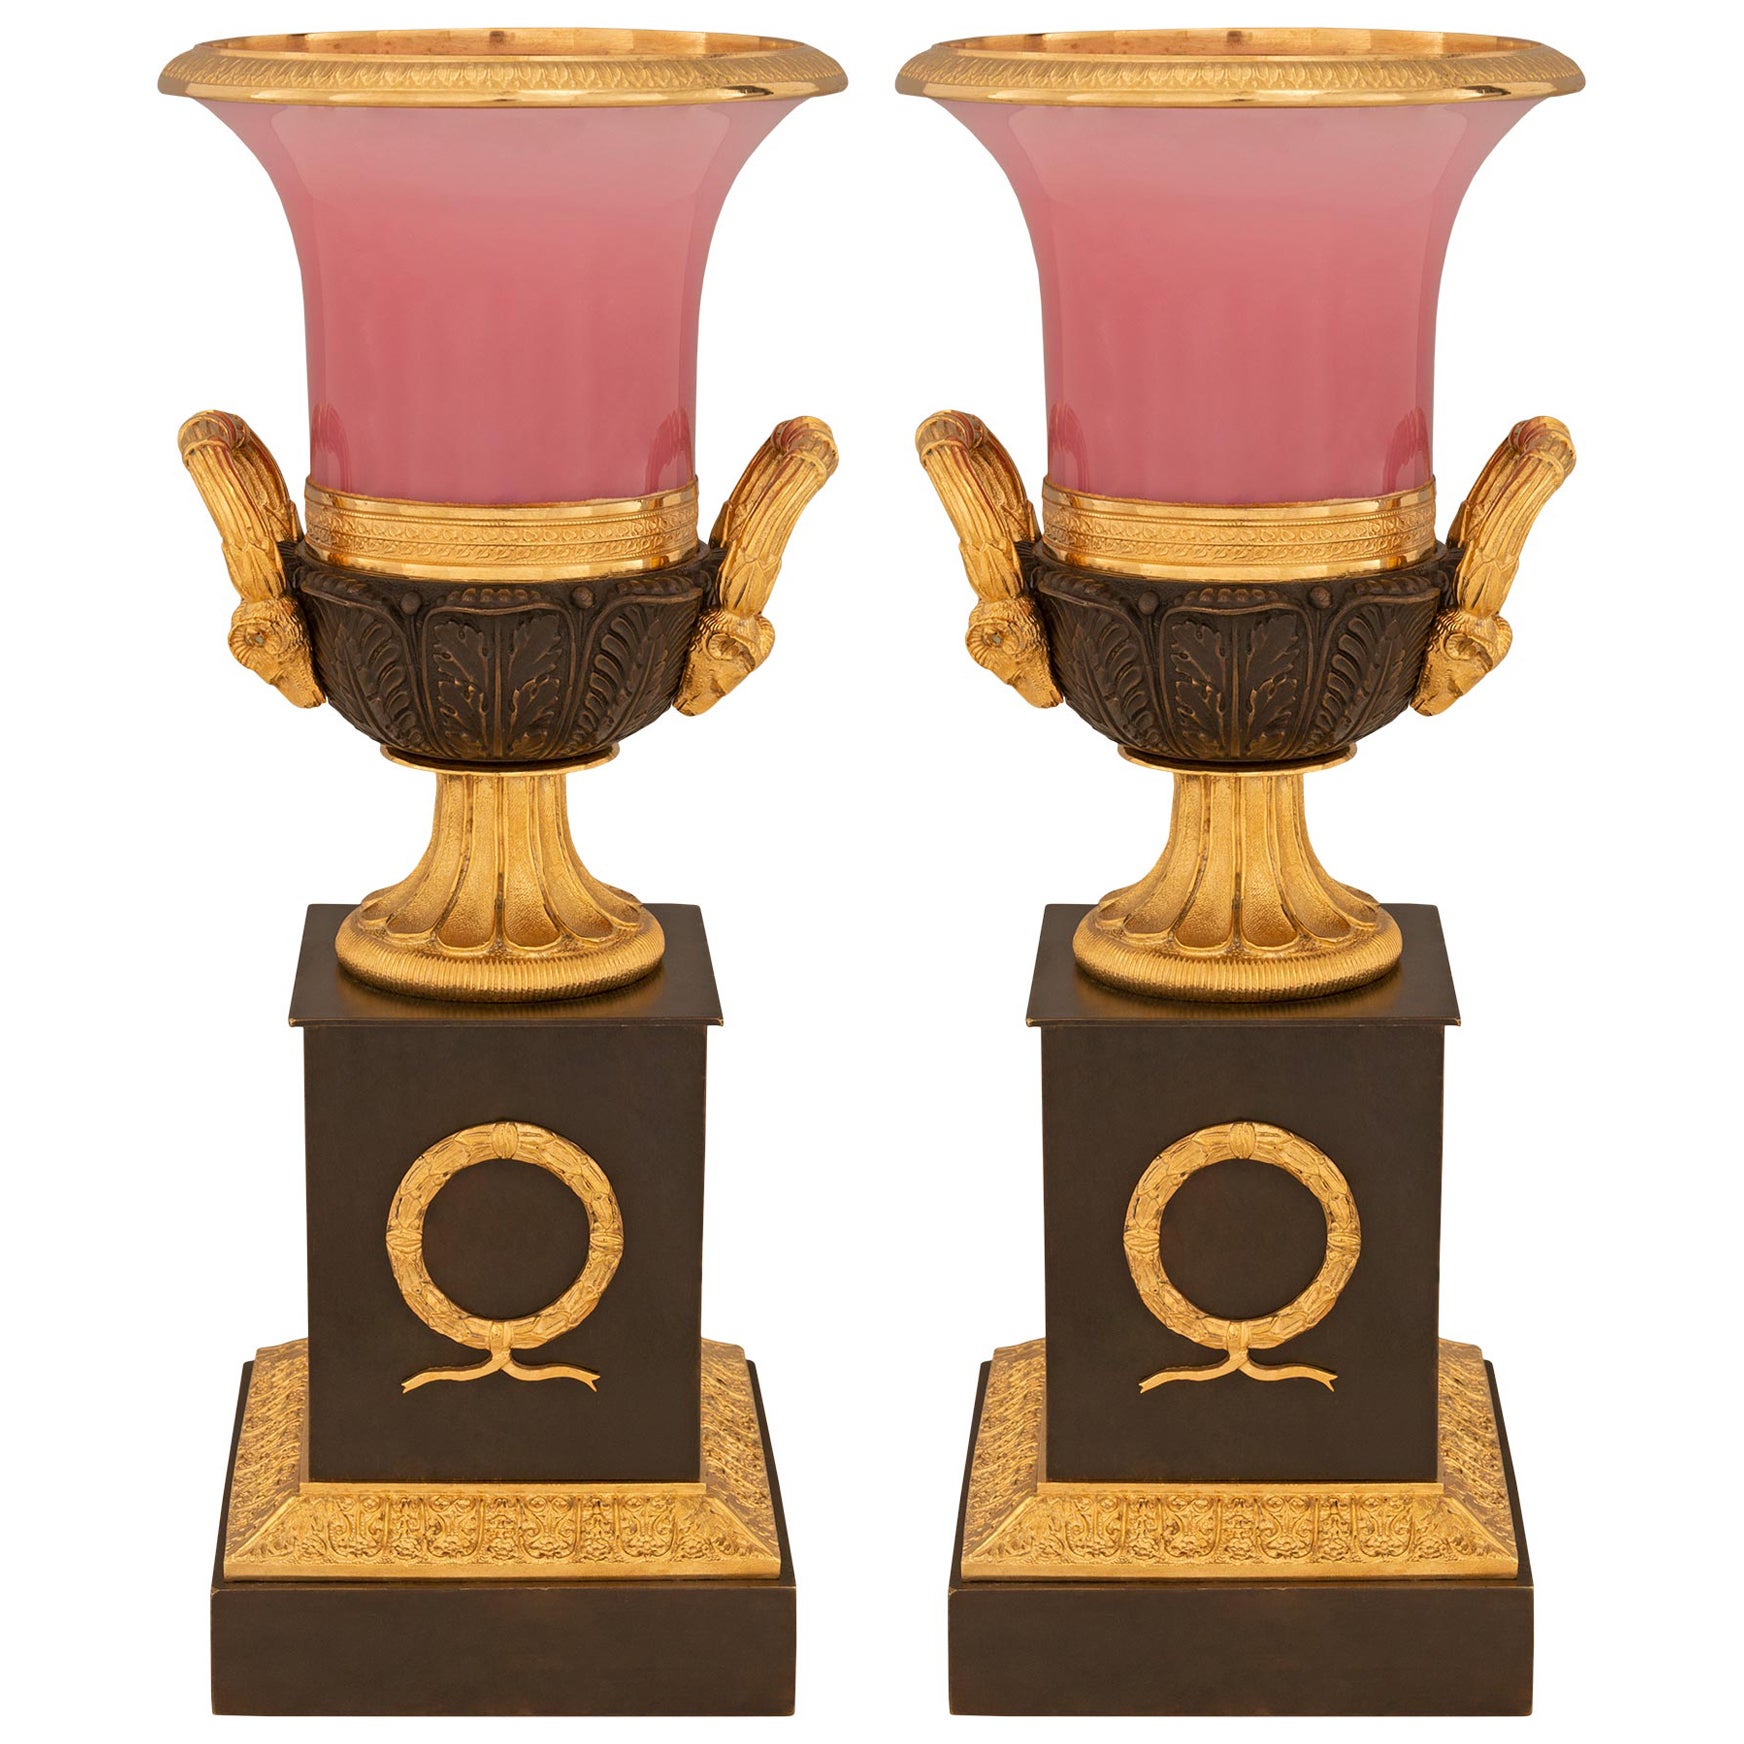 Pair of French 19th Century Neo-Classical St. Bronze, Glass, and Ormolu Urns